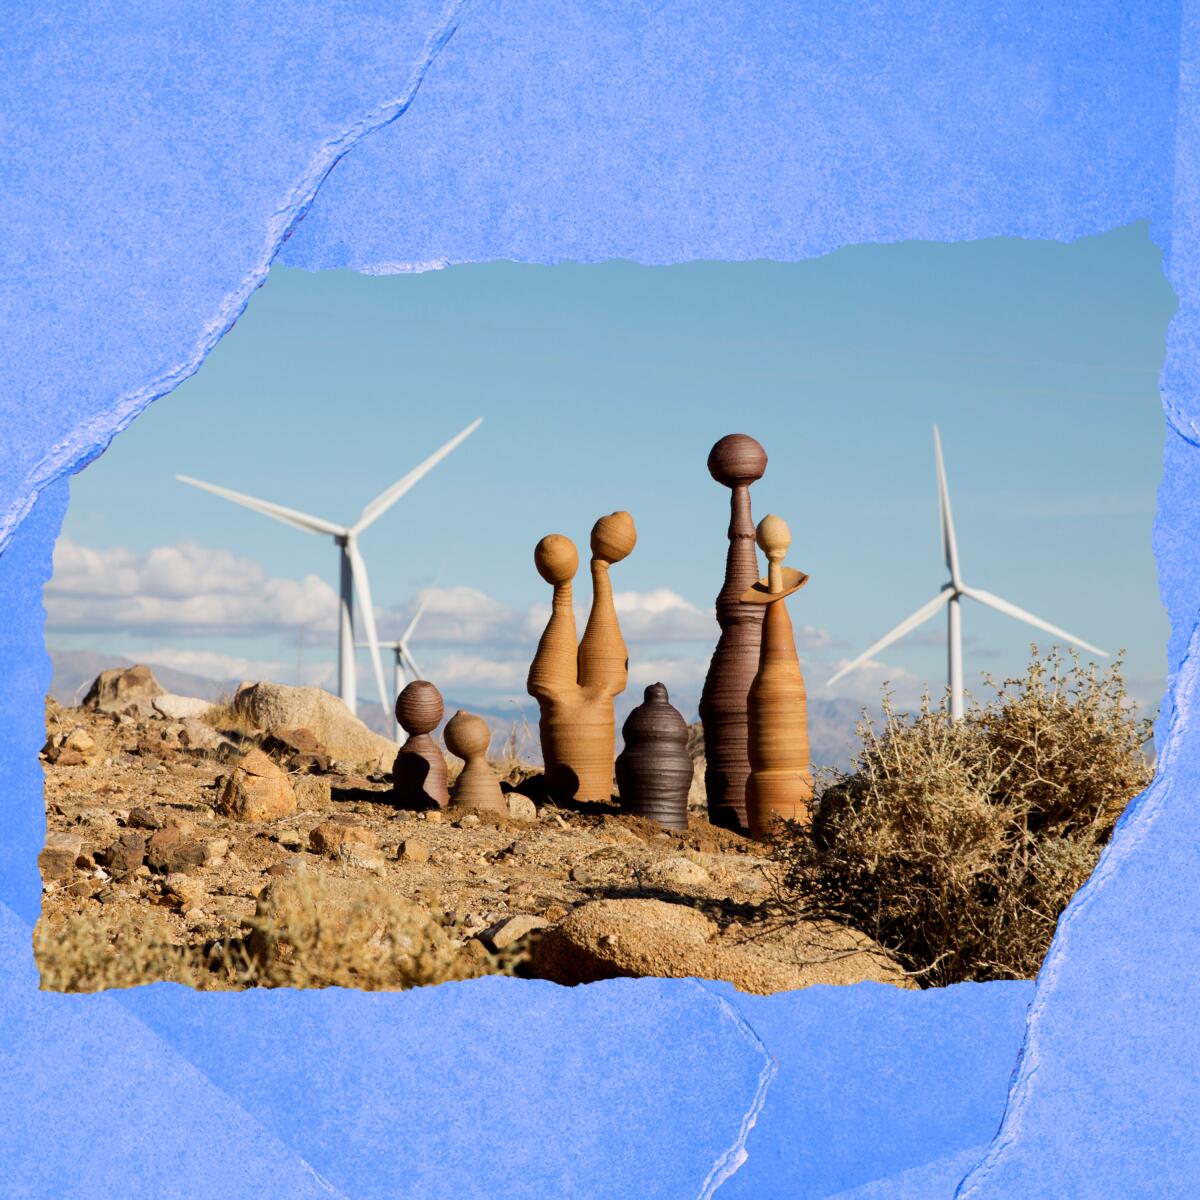 Brandon Lomax's sculptures poke up from the rocks, with giant wind turbines in the distance.